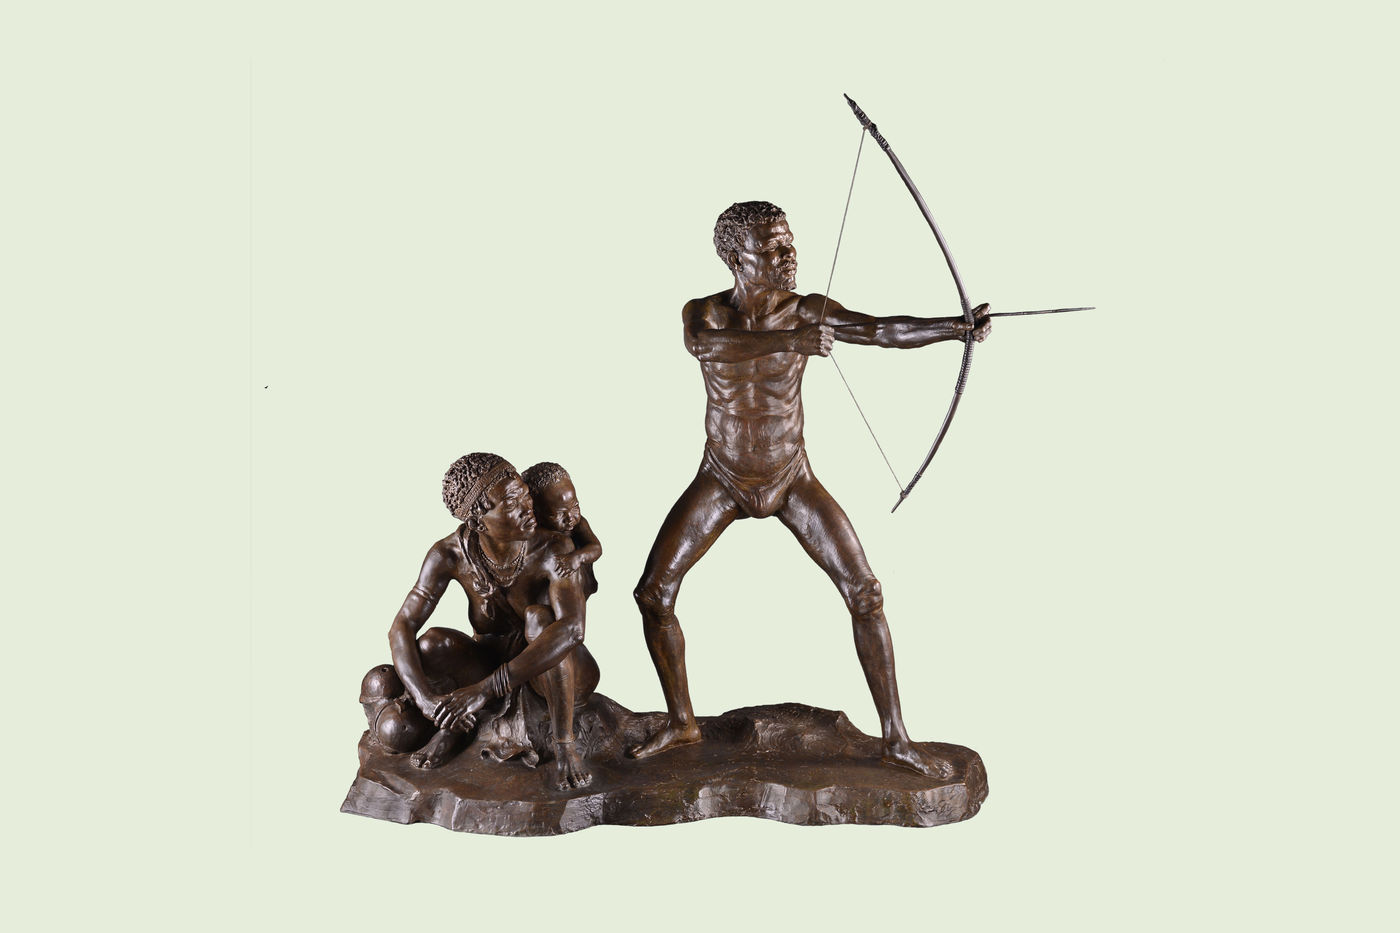 A bronze sculpture depicting an adult man standing with a bow and arrow drawn. Next to him, an adult woman sits with a child on her back.